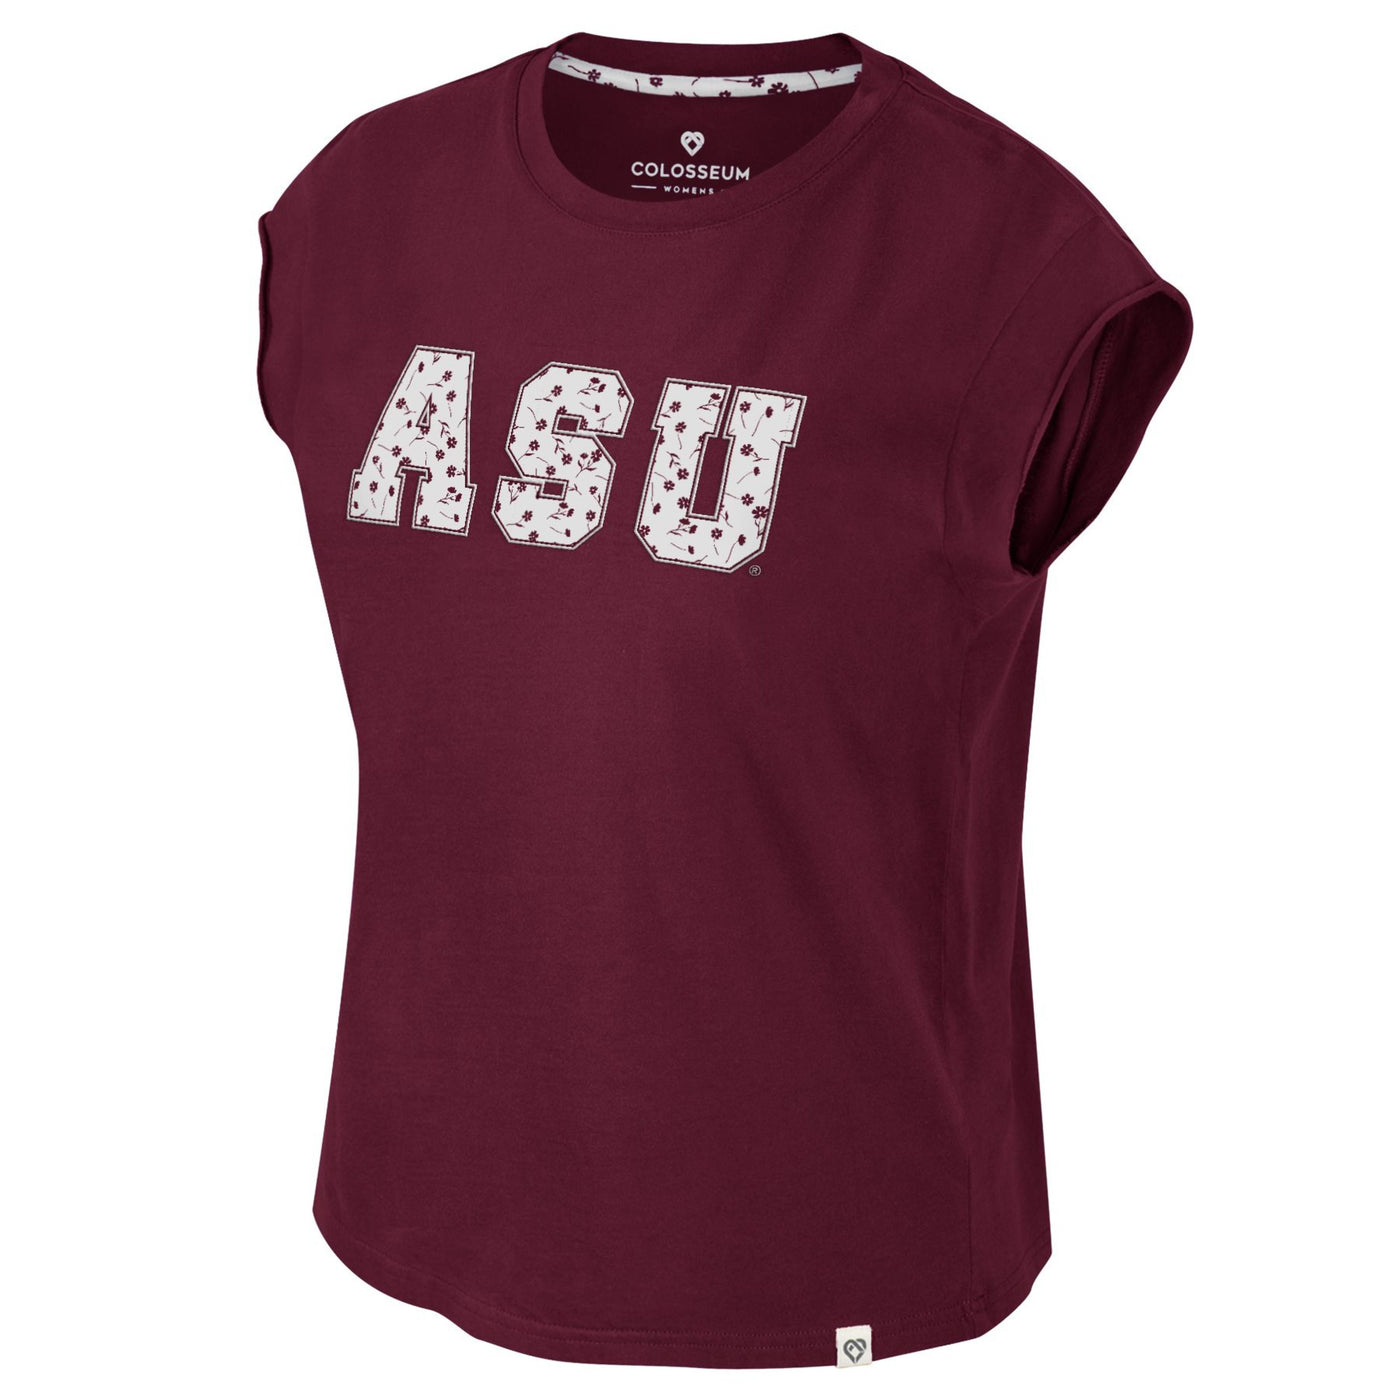 ASU women's maroon muscle tee with the text 